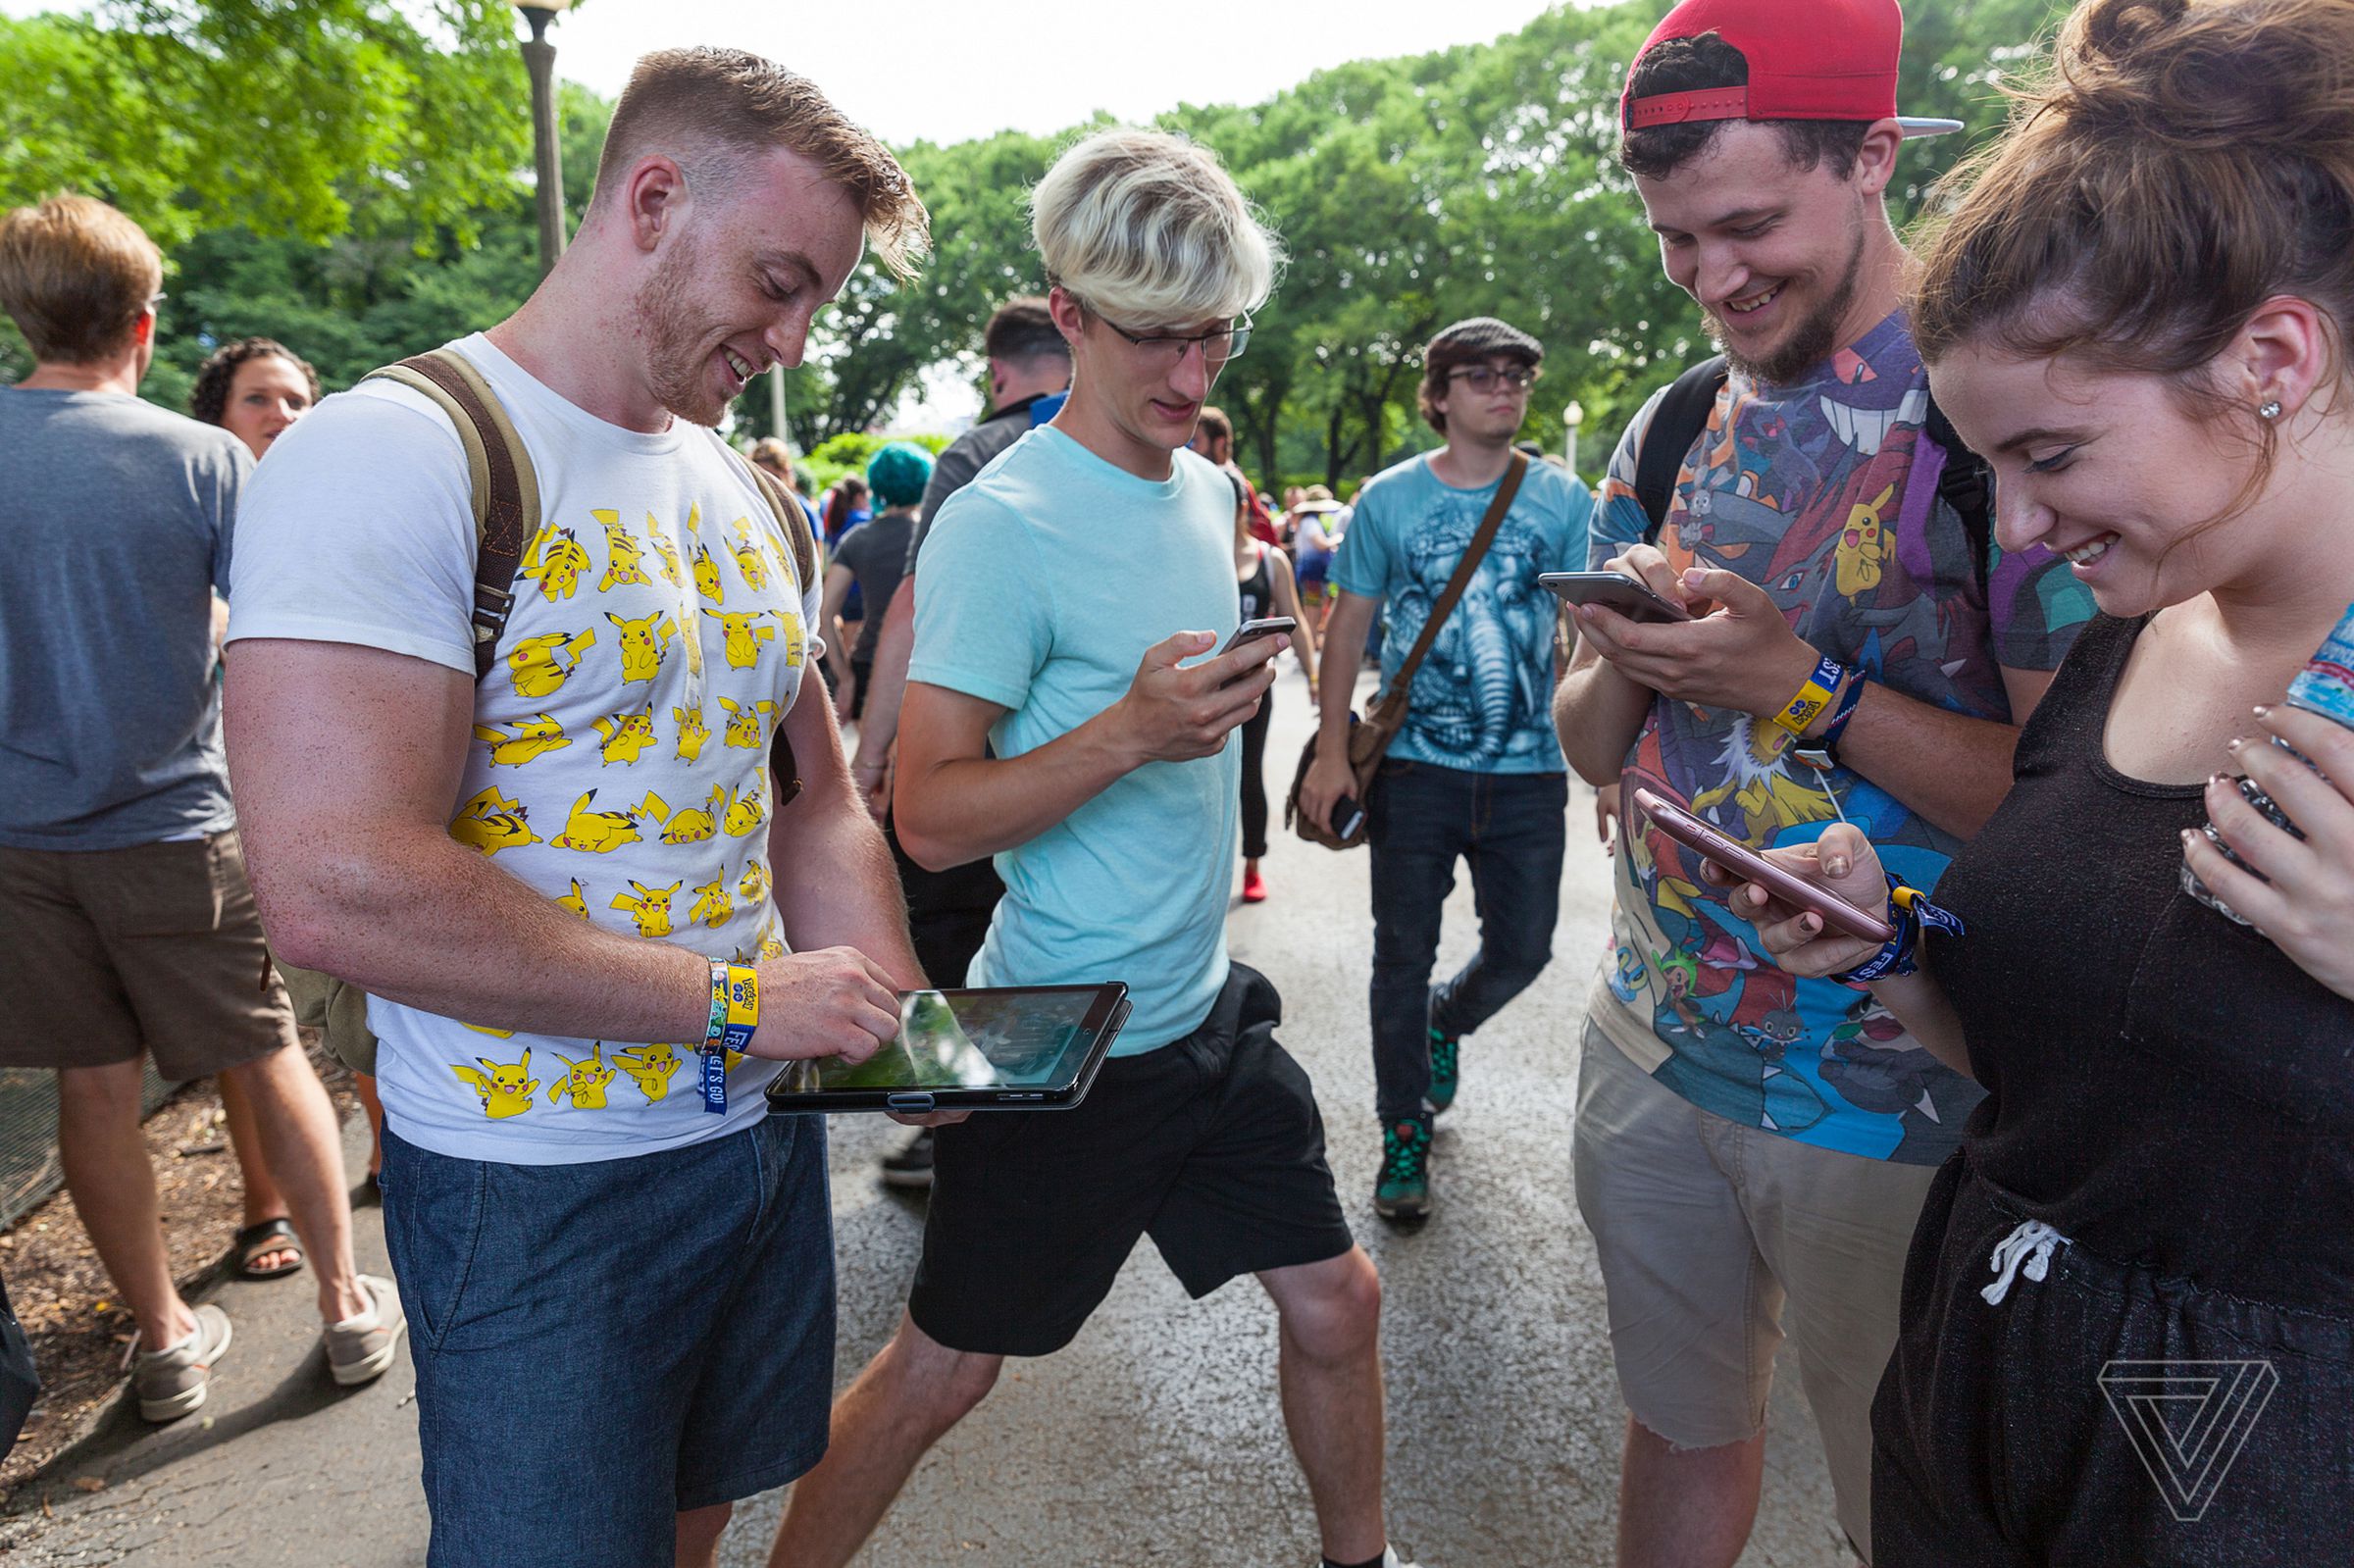 This group of friends found better connection away from the fest’s center